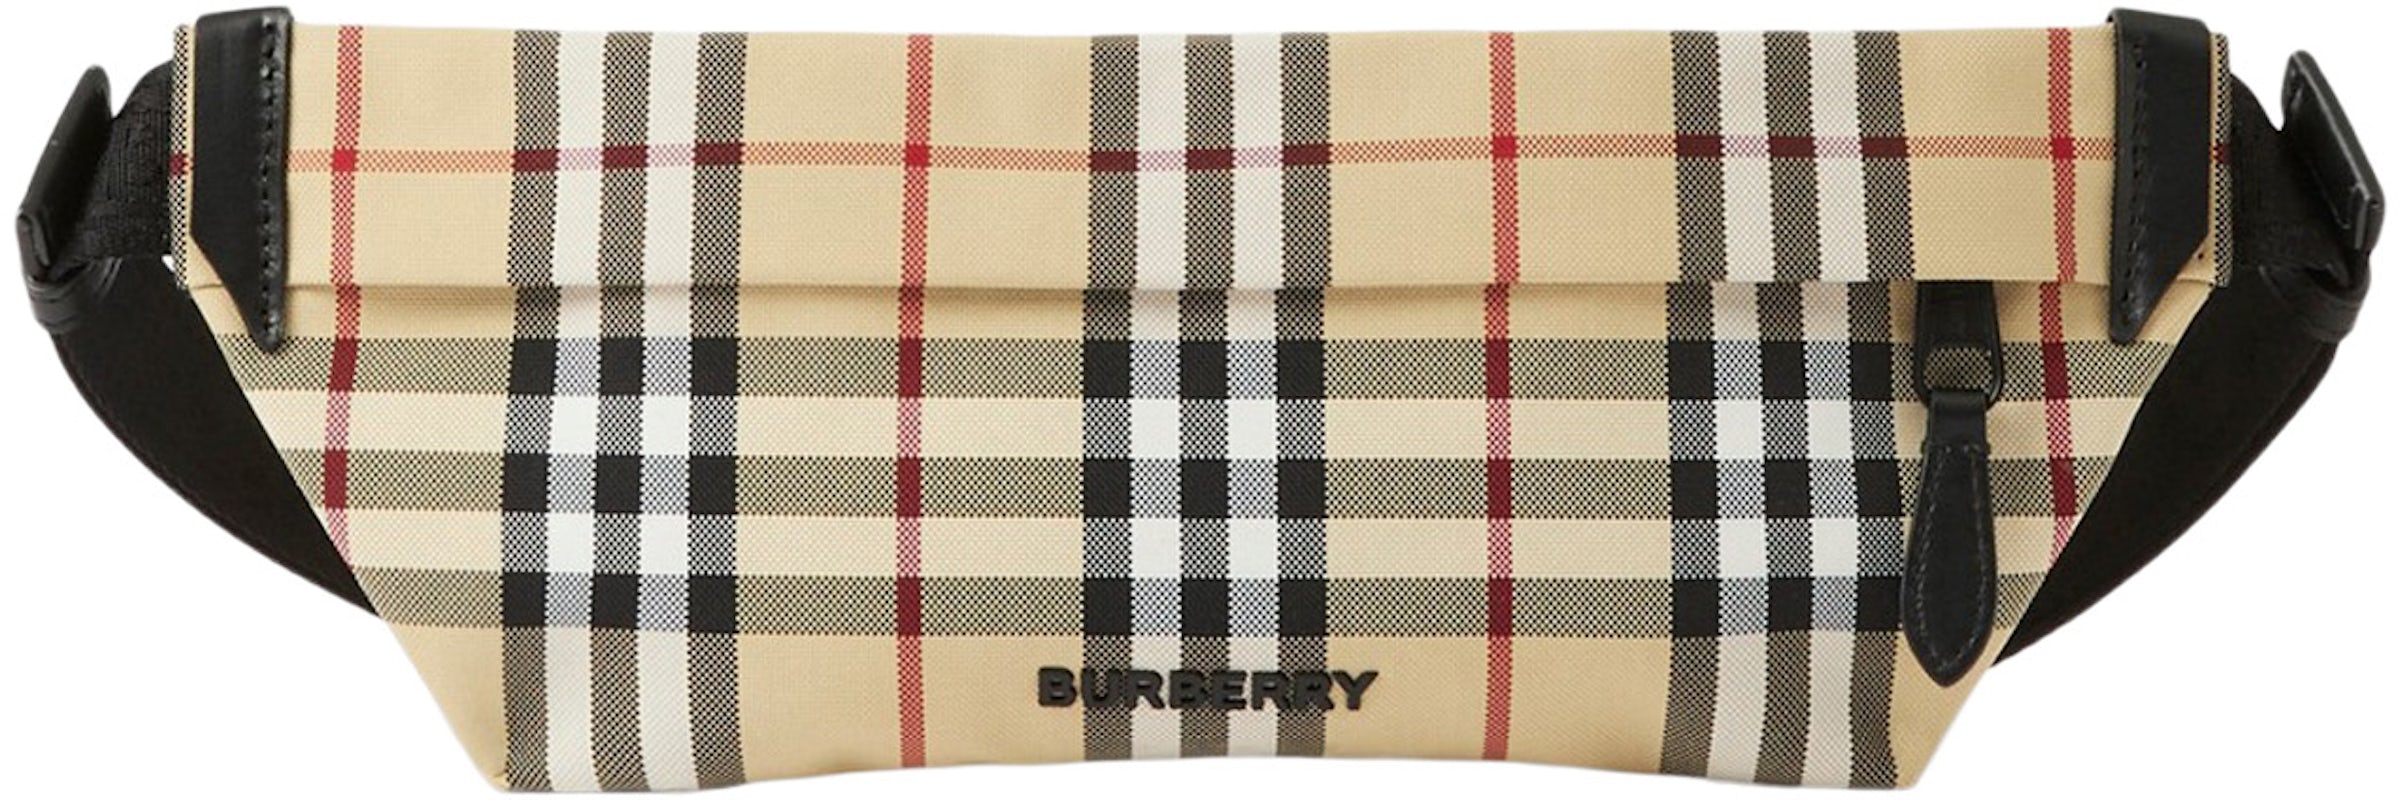 Burberry Belted Leather TB Bag - Farfetch